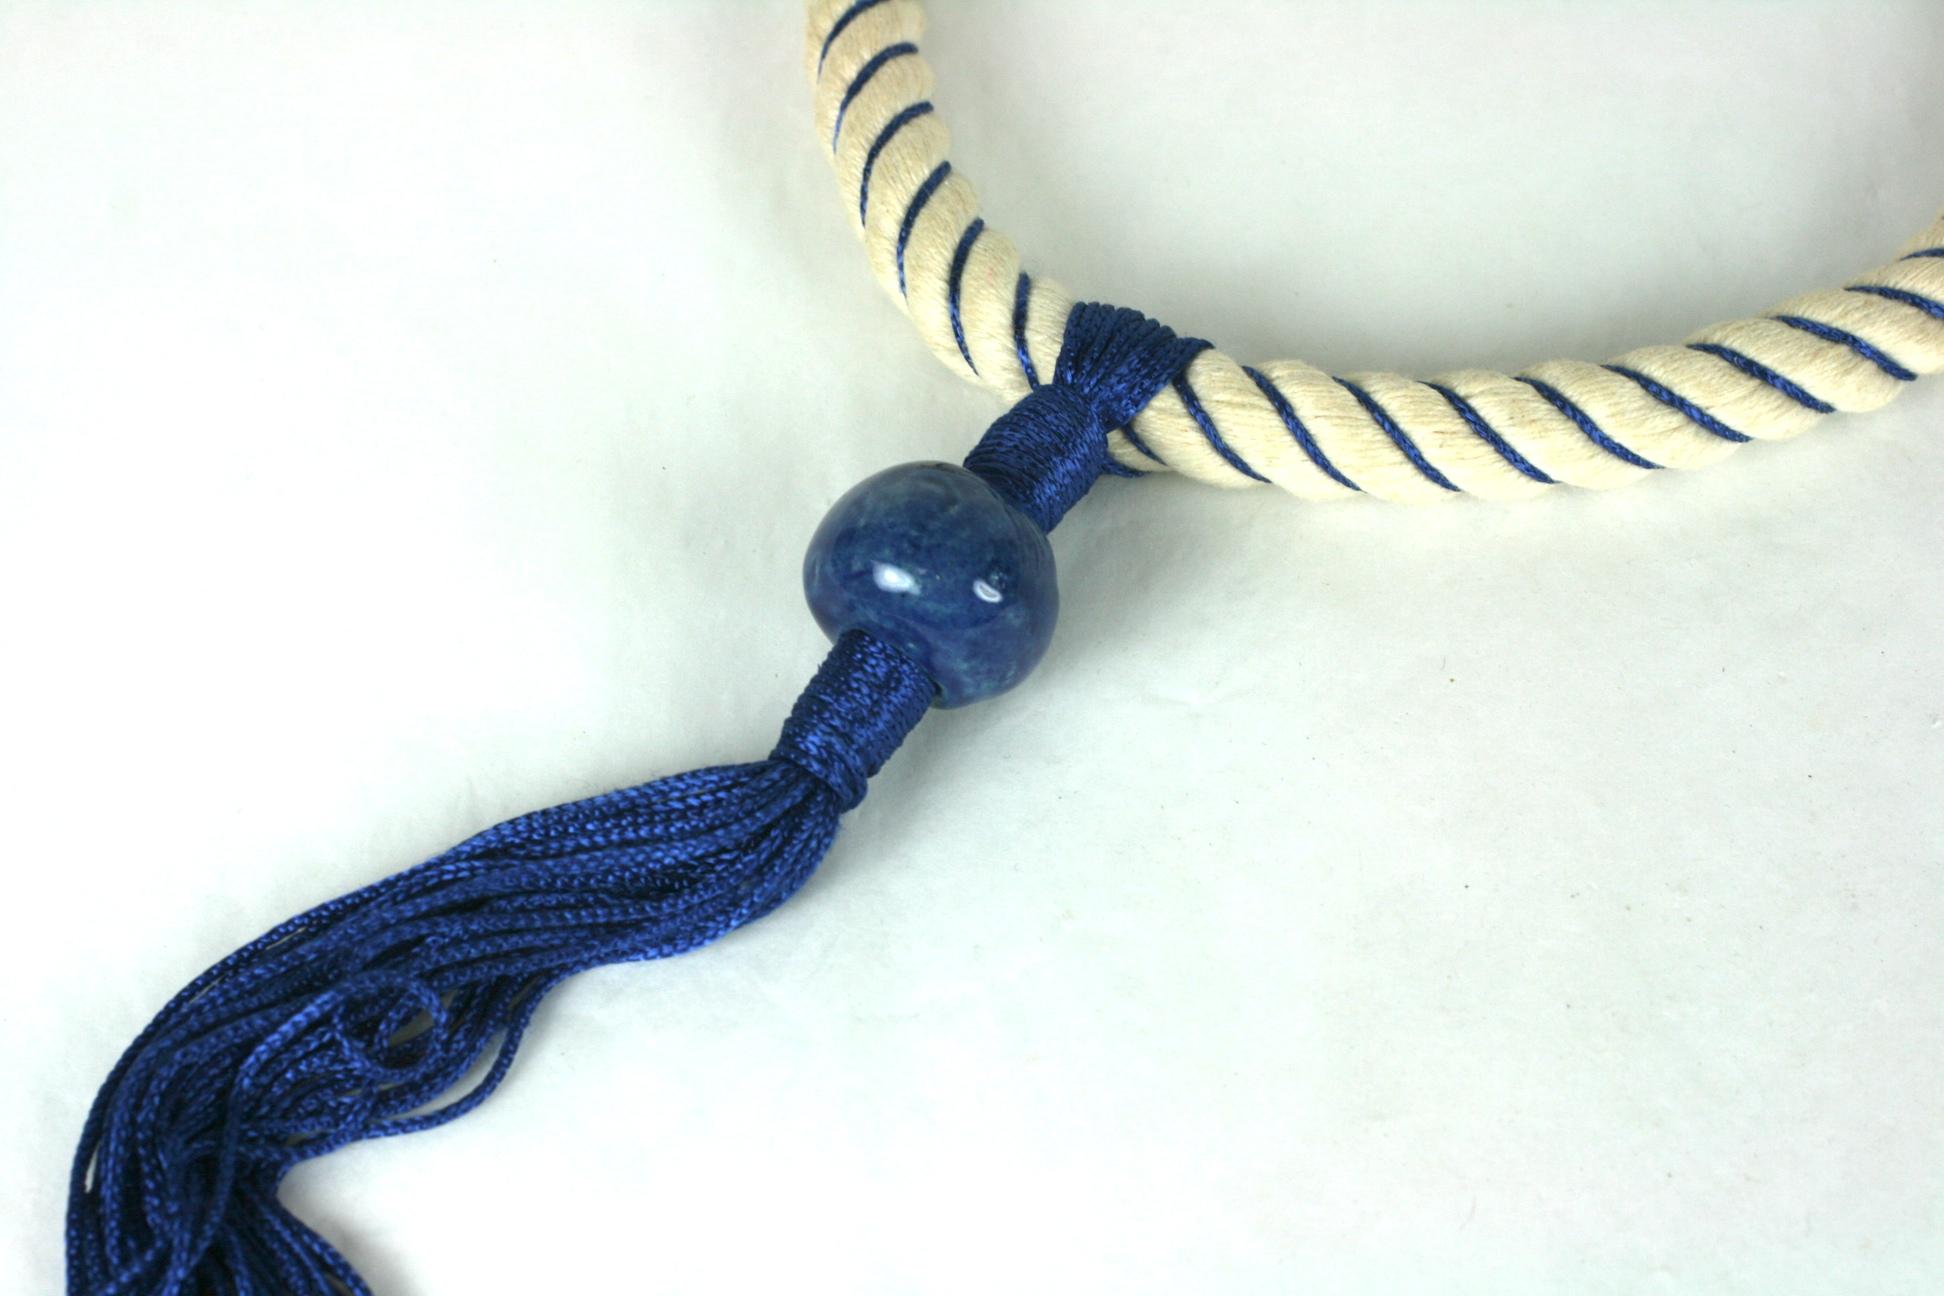 Rare Yves Saint Laurent Haute Couture Necklace Spring Summer 1966. Of nautical inspiration composed of white cotton rope with blue silk and rayon passementerie detail. Focal long tassel pendant and artisan made ceramic bead, gilt metal end caps and